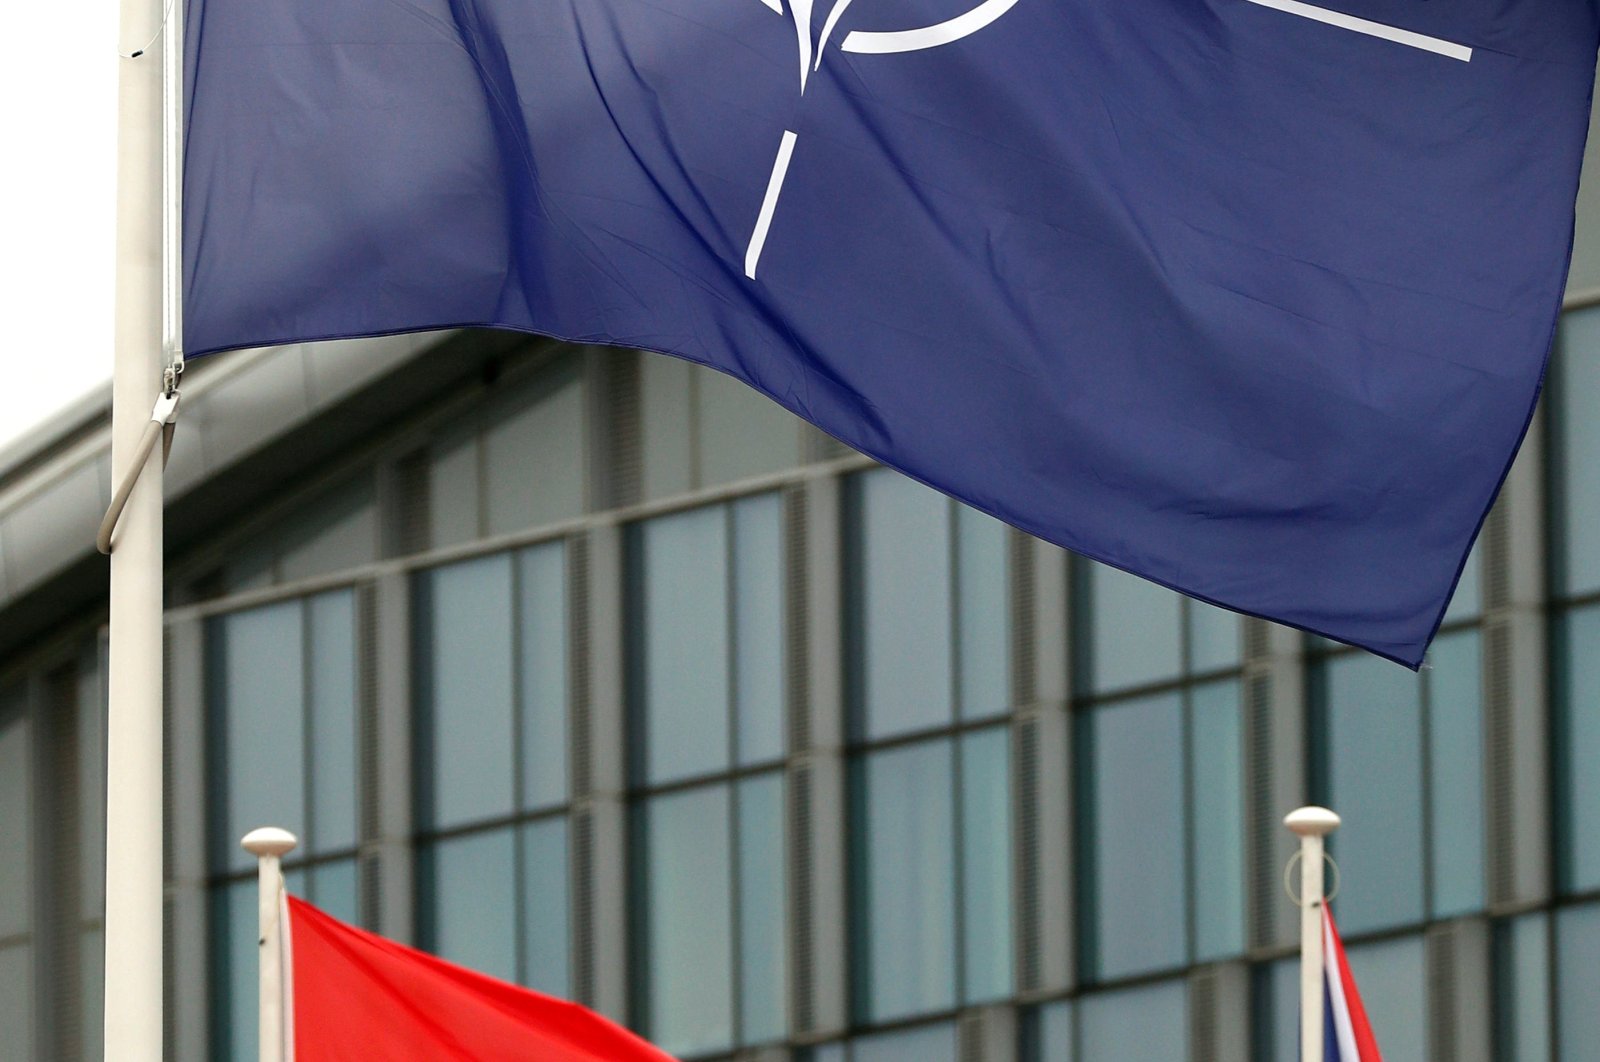 NATO and Turkish flags flutter at the Alliance headquarters in Brussels, Belgium, Nov. 26, 2019. (Reuters Photo)